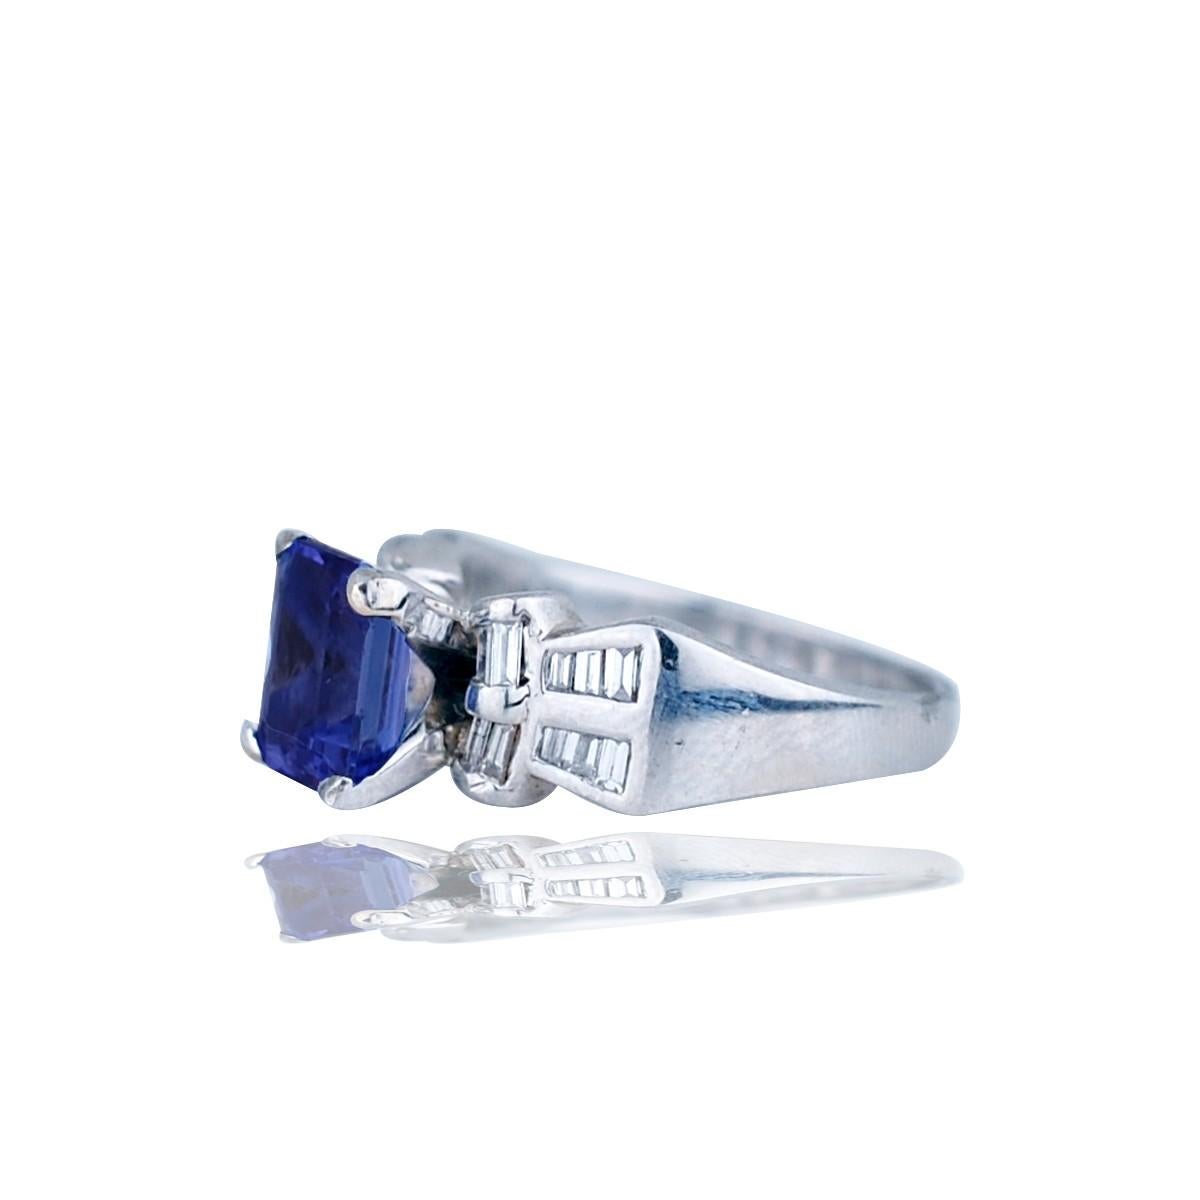 Platinum Ring, Bow-Tie Styled With Baguette Diamond & Tanzanite 
Center Emerald Cut, Tanzanite measuring 8.30 x 6.50 x 4.84 mm, weighing approximately 2.60 carat. 
20 Baguette diamonds set in channel are flanked on either side of ring. Hallmarked